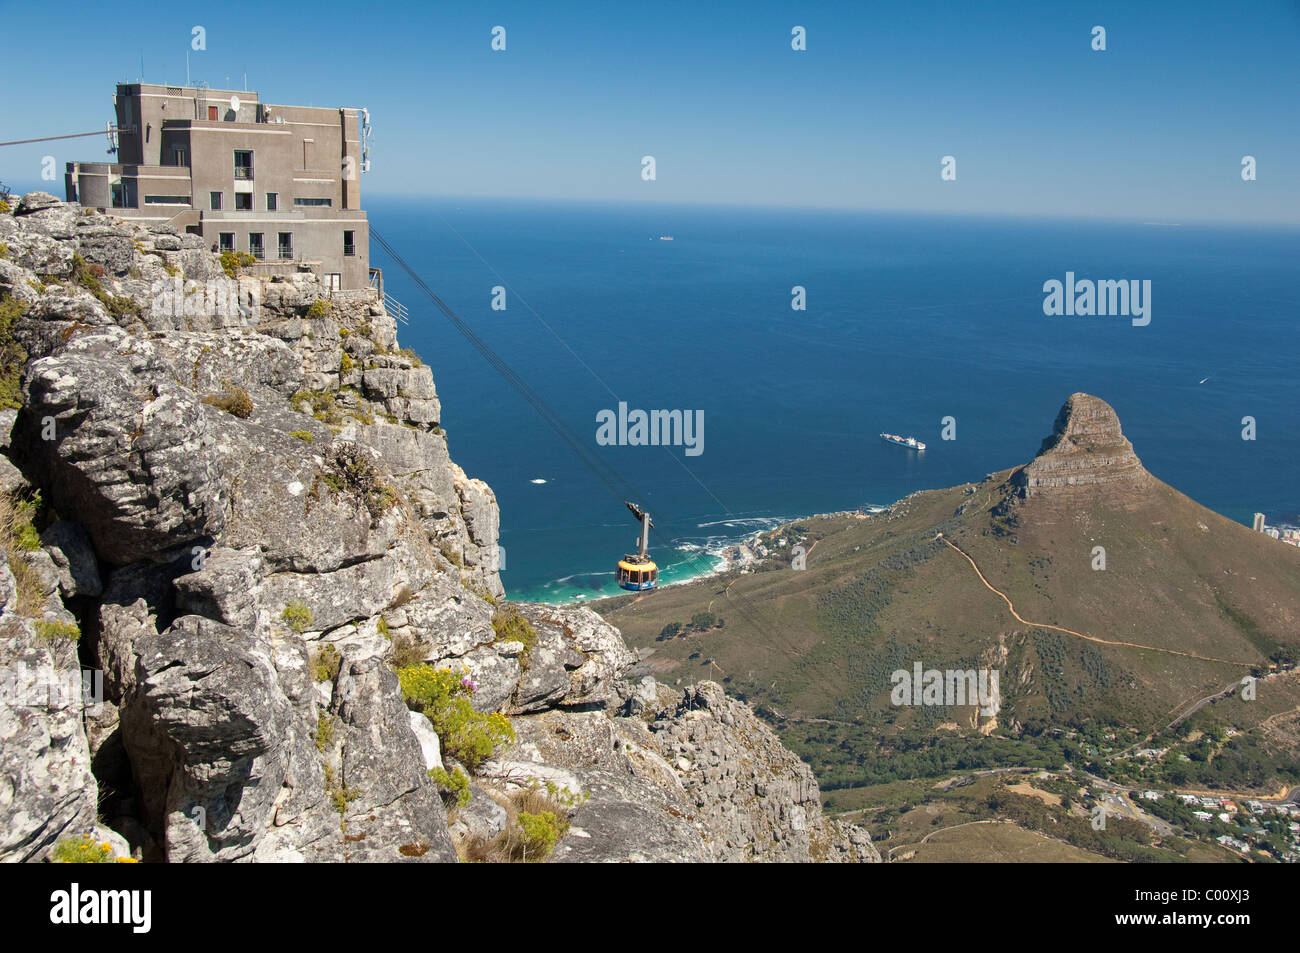 South Africa, Cape Town, Table Mountain National Park Cableway aerial tram and station. Stock Photo